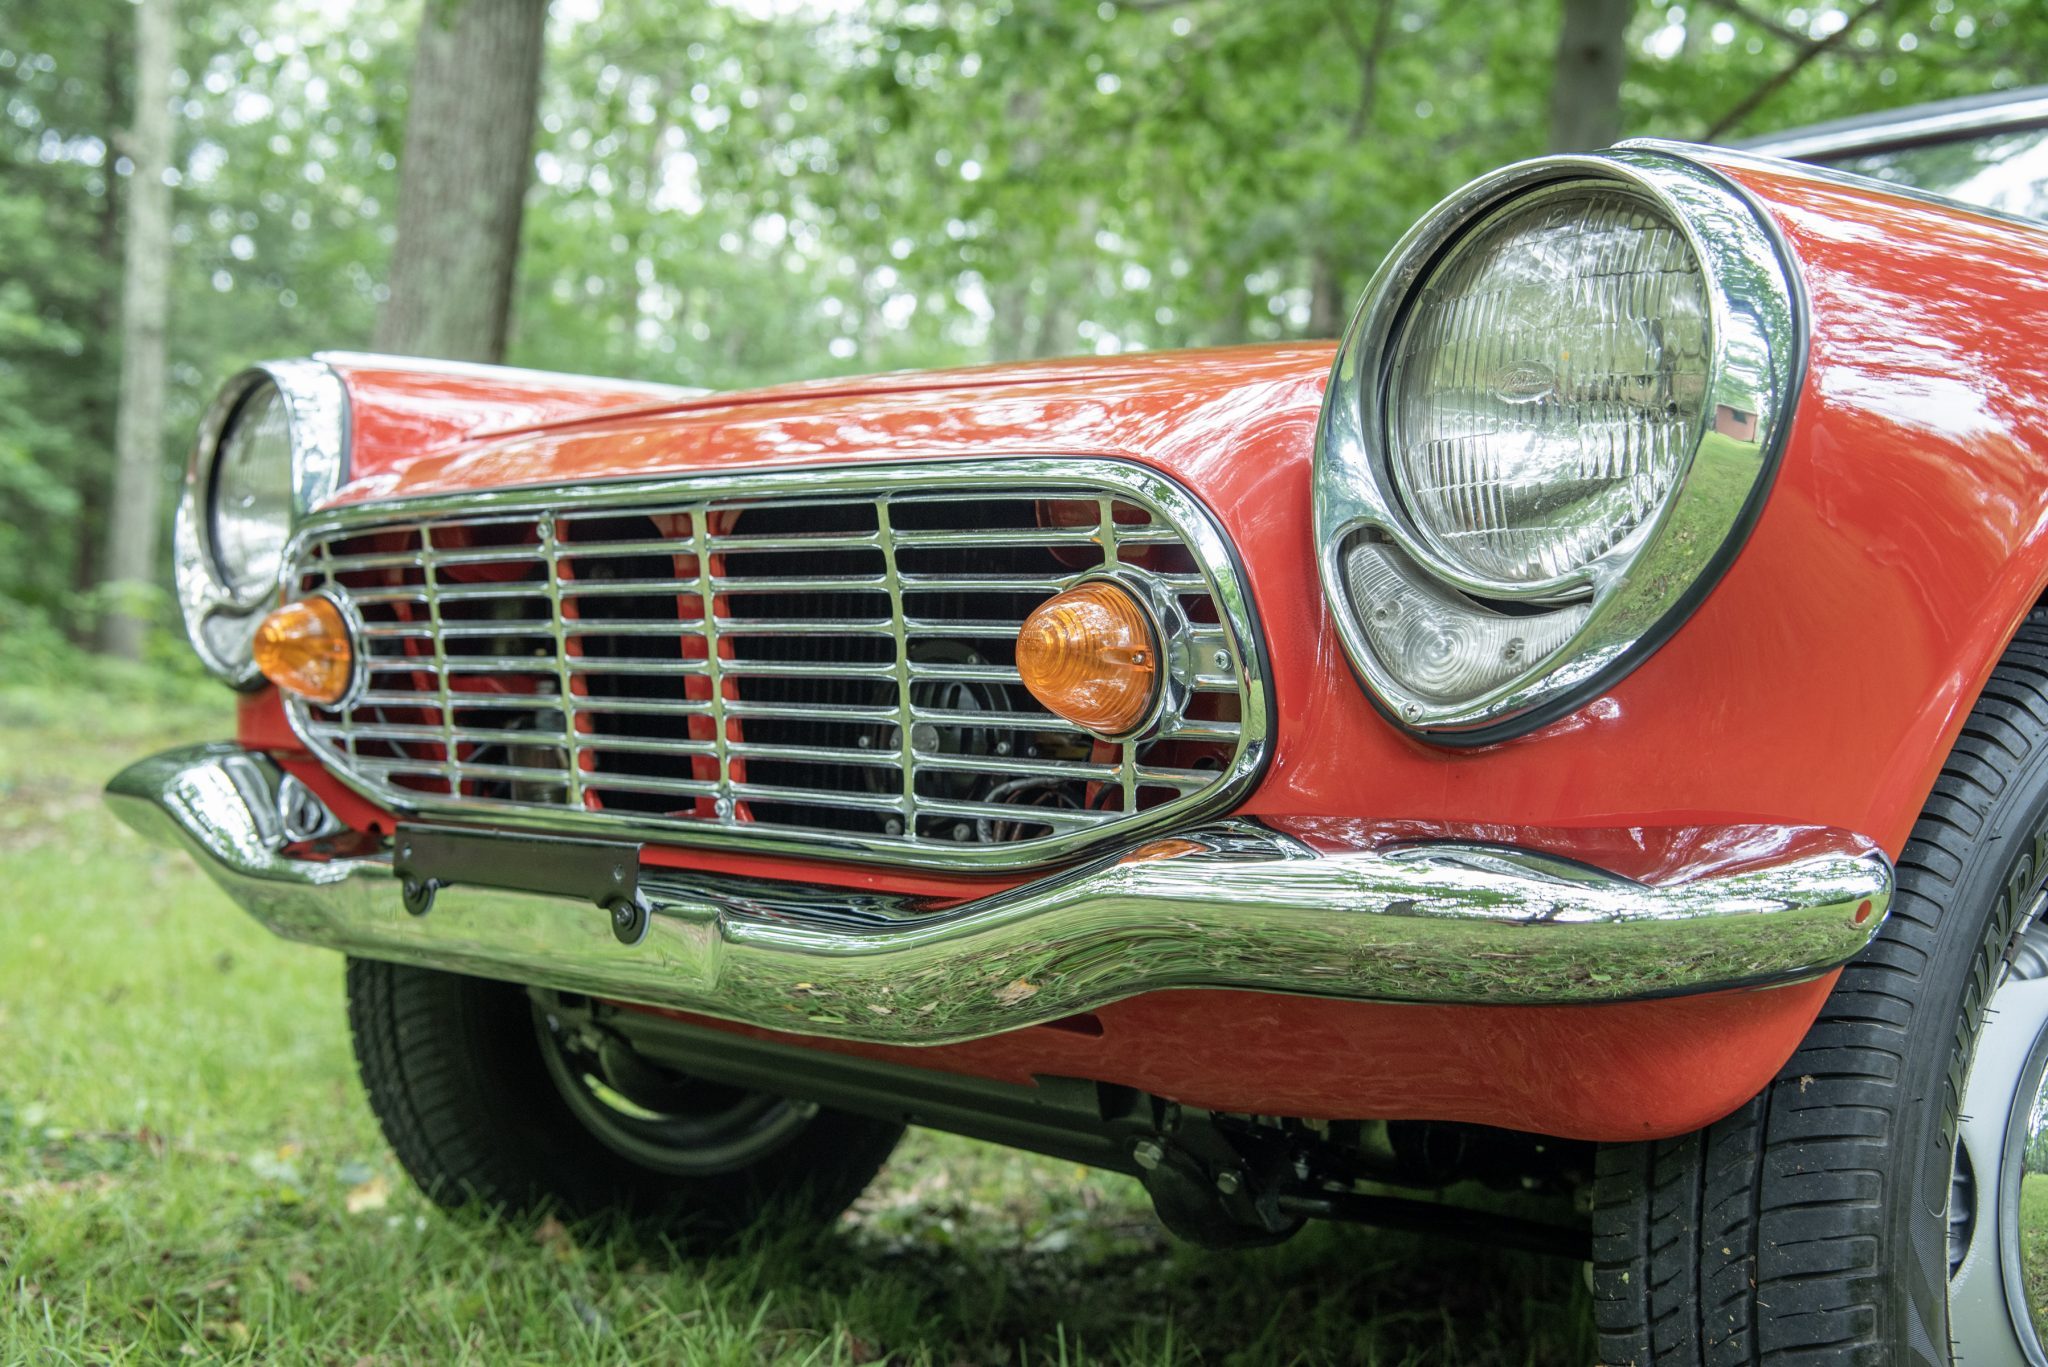 This gorgeously restored 1966 Honda S600 just broke our price guide